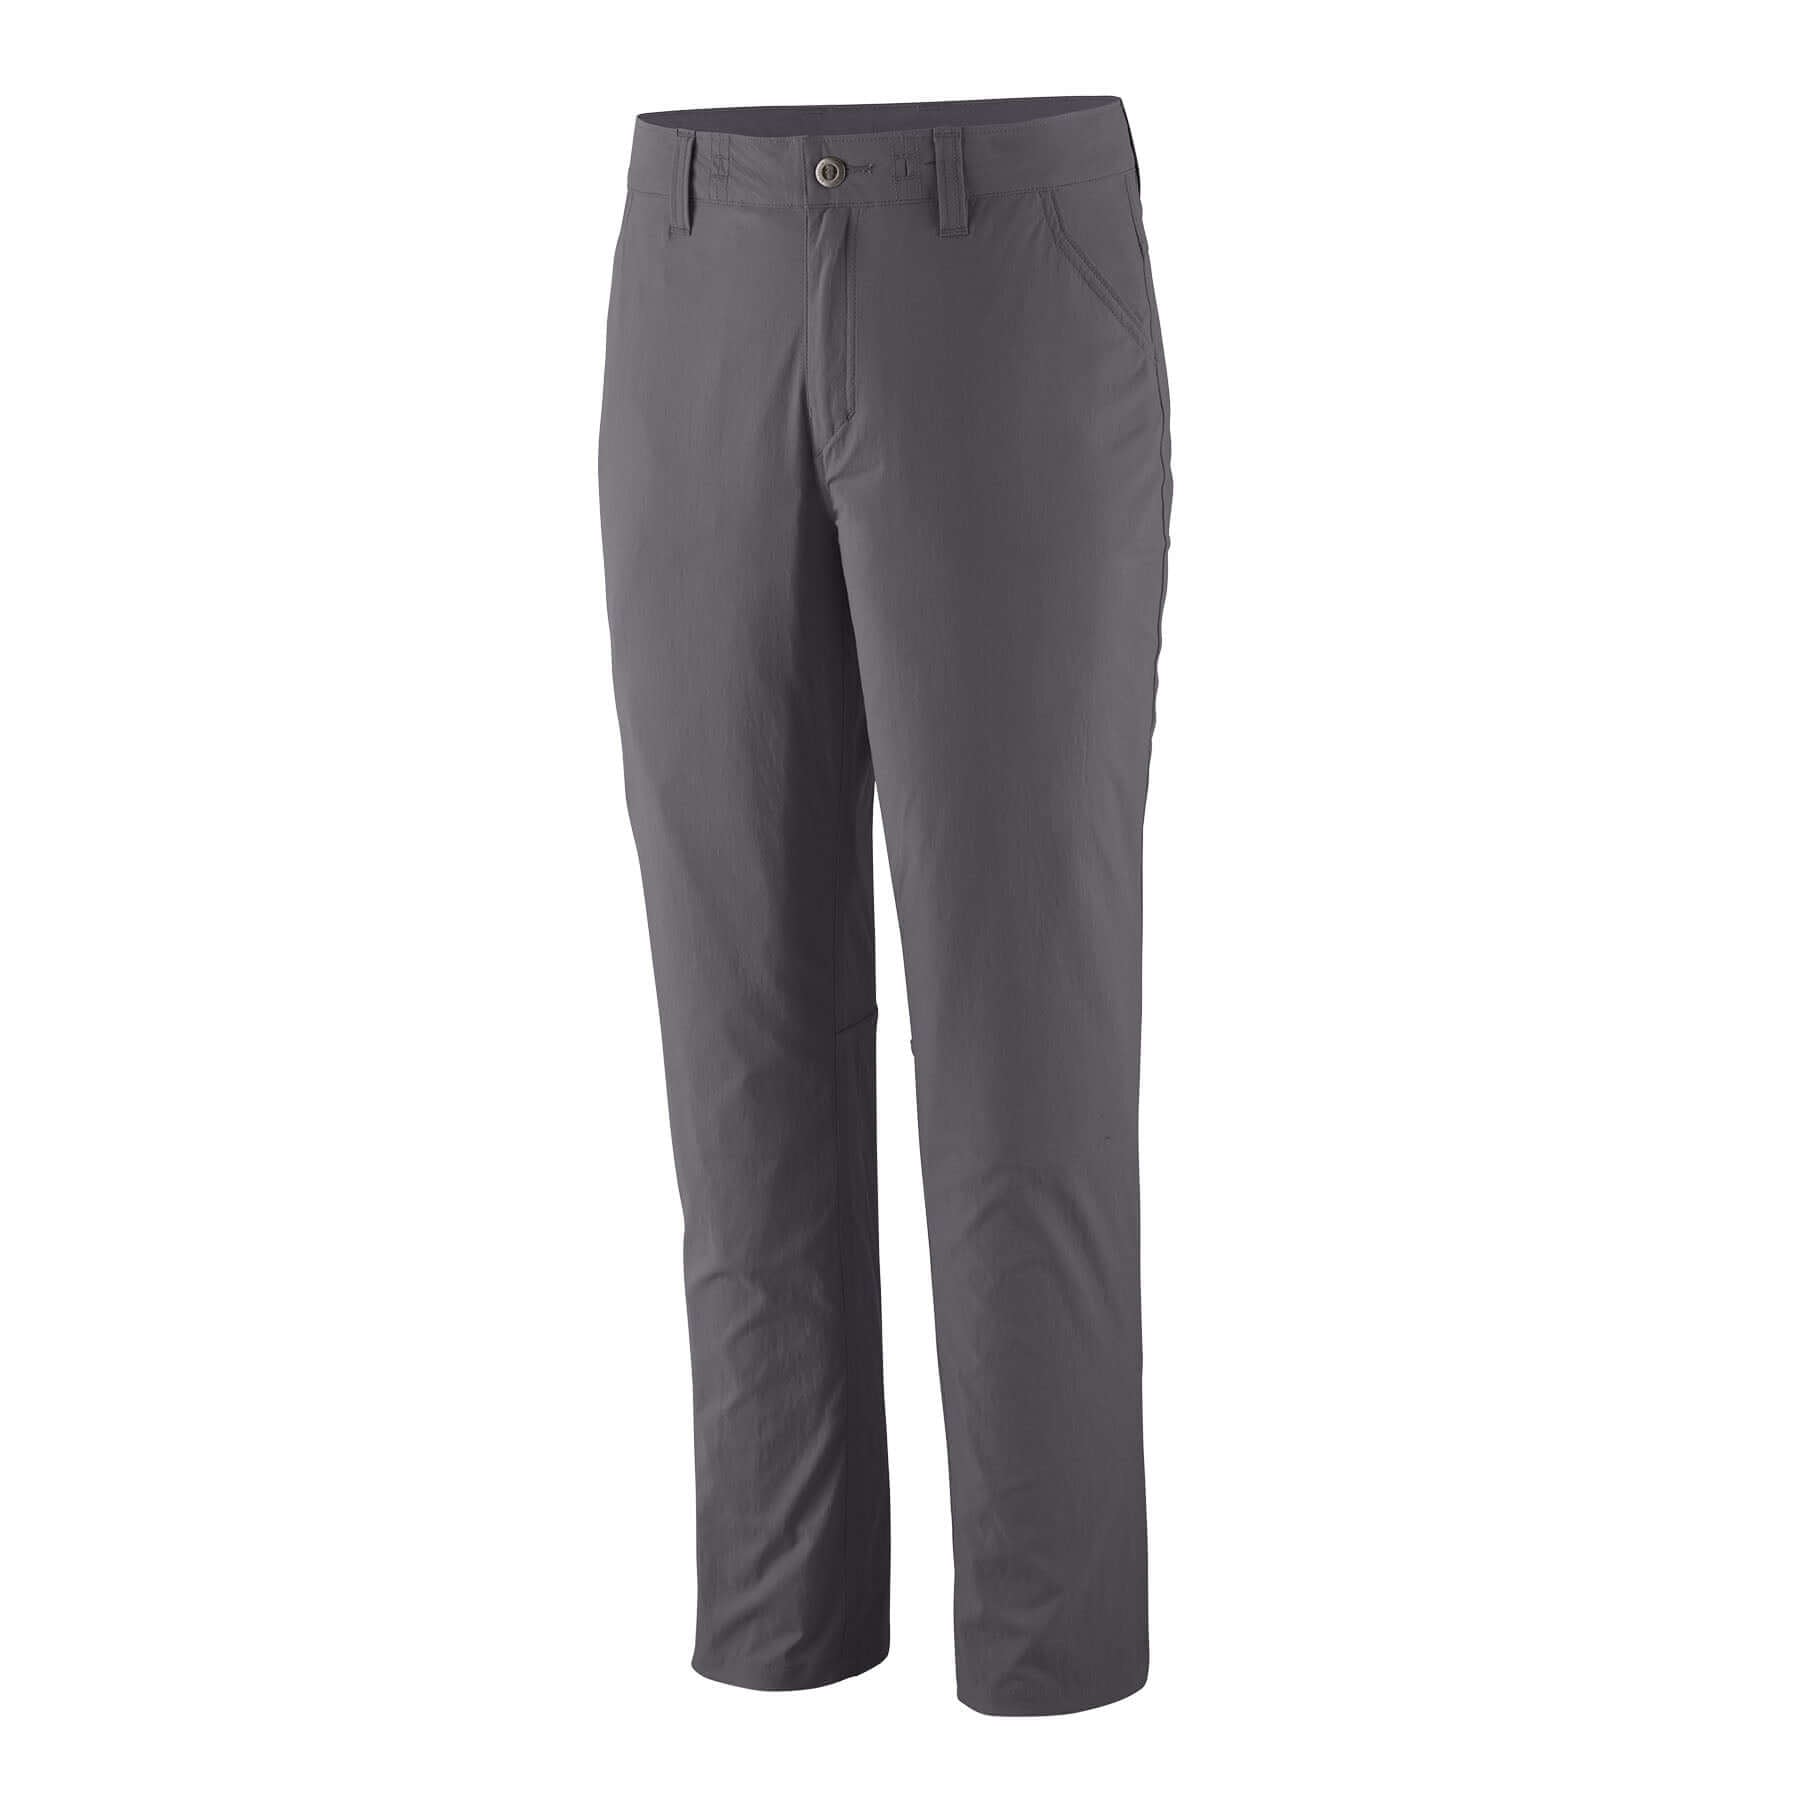 Women's Quandary Pants - Reg in FORGE GREY | Patagonia Bend